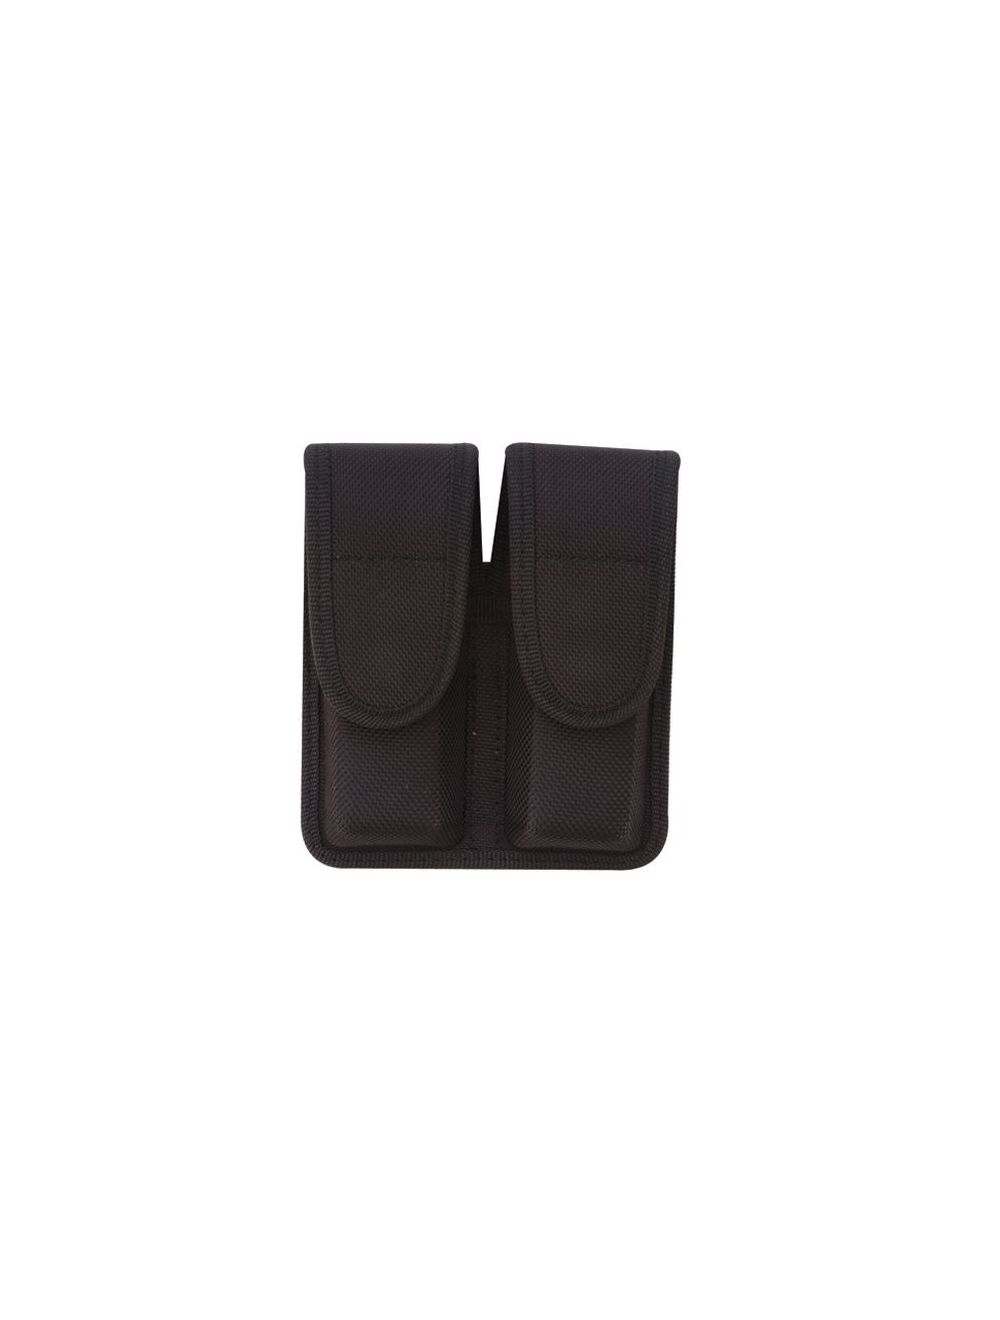 Double Staggered Mag Pouch